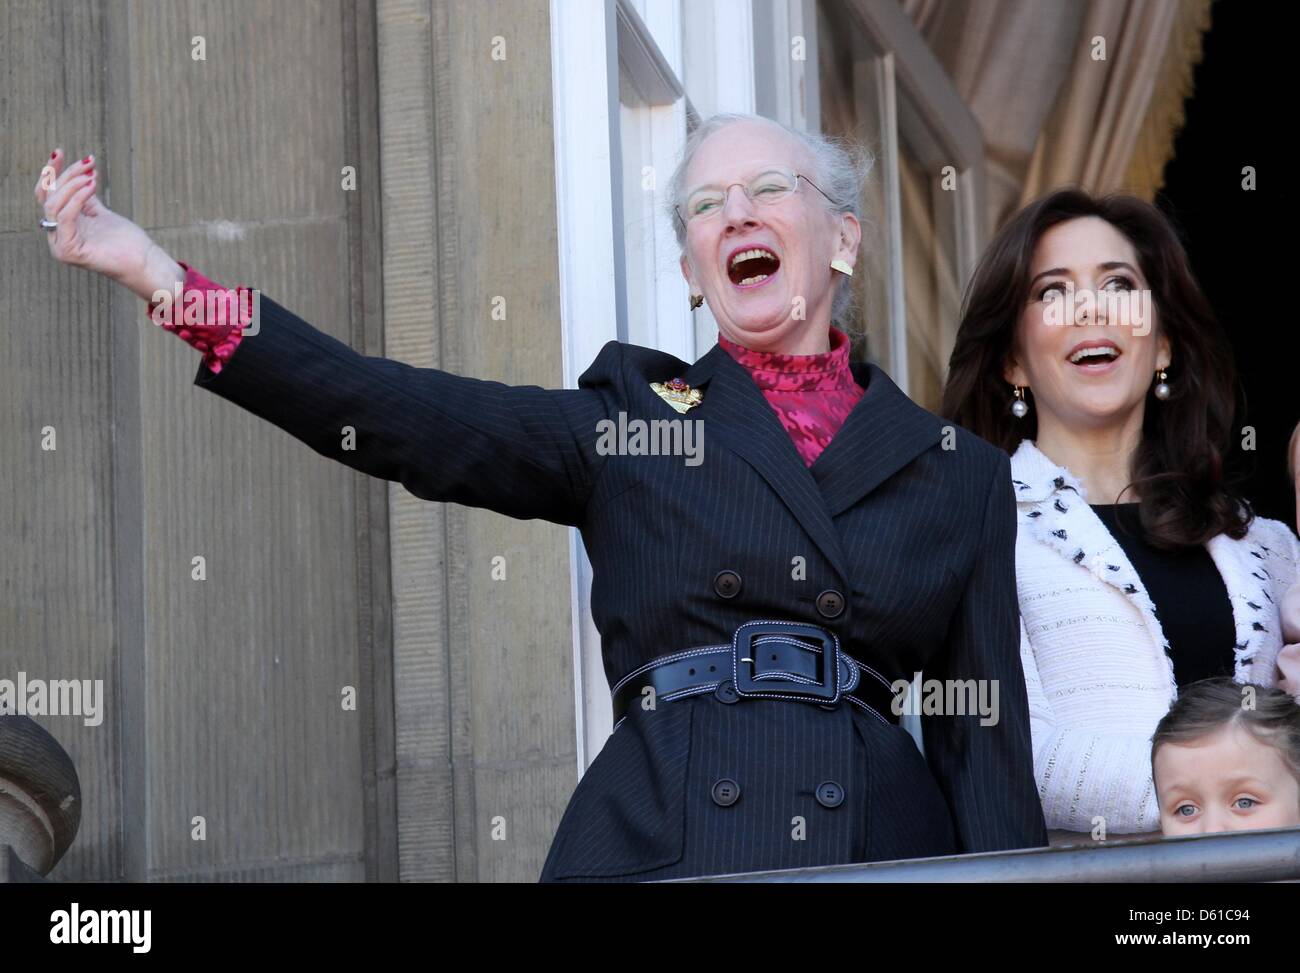 Danish Queen Margrethe (L), Crown Princess Mary and her daughter Isabella (front) stand on the balcony of Amalienborg Palace to celebrate the 72nd birthday of Queen Margrethe in Copenhagen, Denmark, 16 April 2012. Photo: Patrick van Katwijk NETHERLANDS OUT Stock Photo